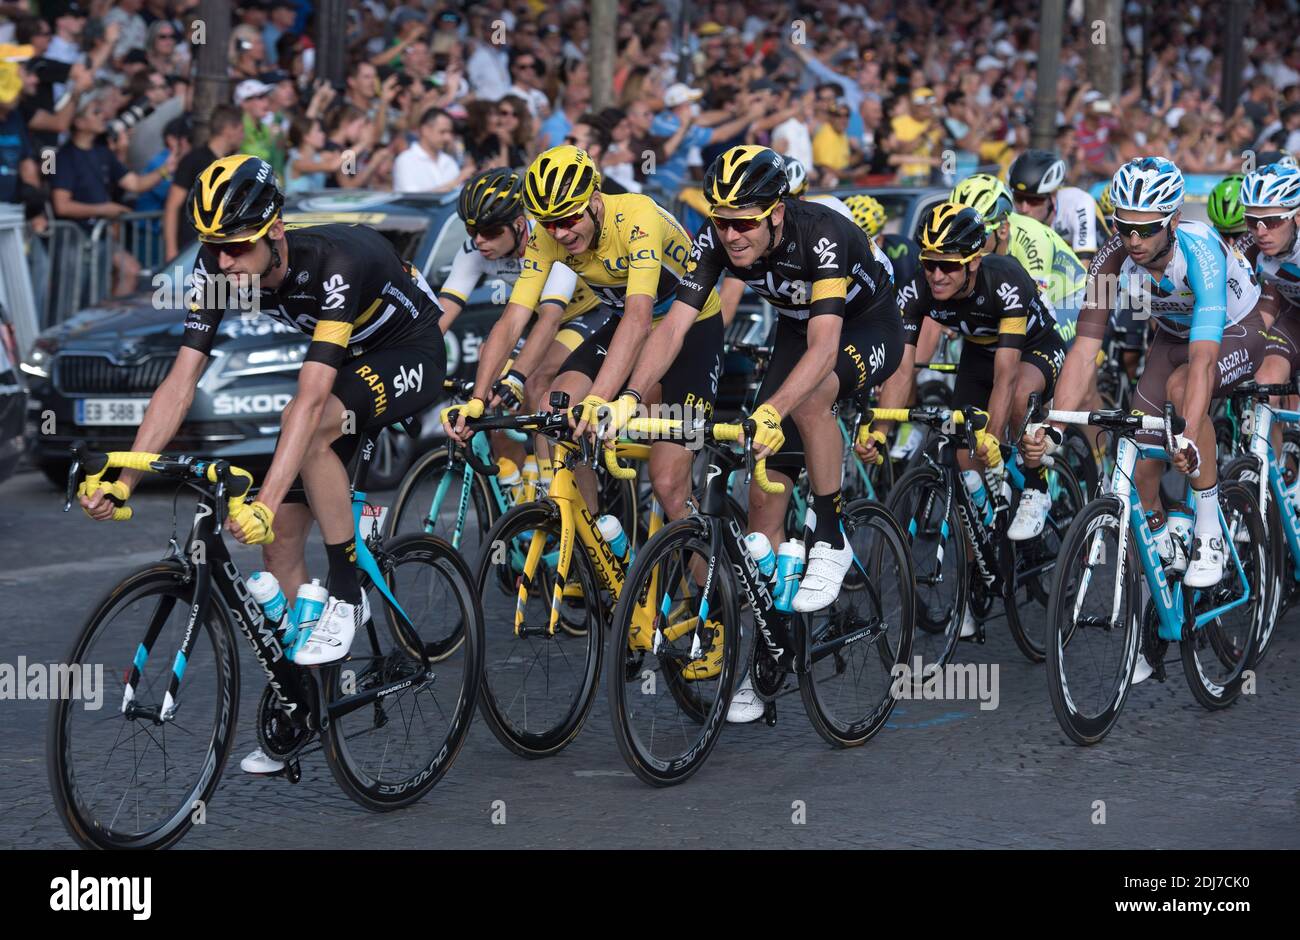 Chris Froome Of Great Britain And Team Sky Celebrates Winning The 16 Le Tour De France Following Stage Twenty One Of The 16 Le Tour De France From Chantilly To Paris Champs Elysees